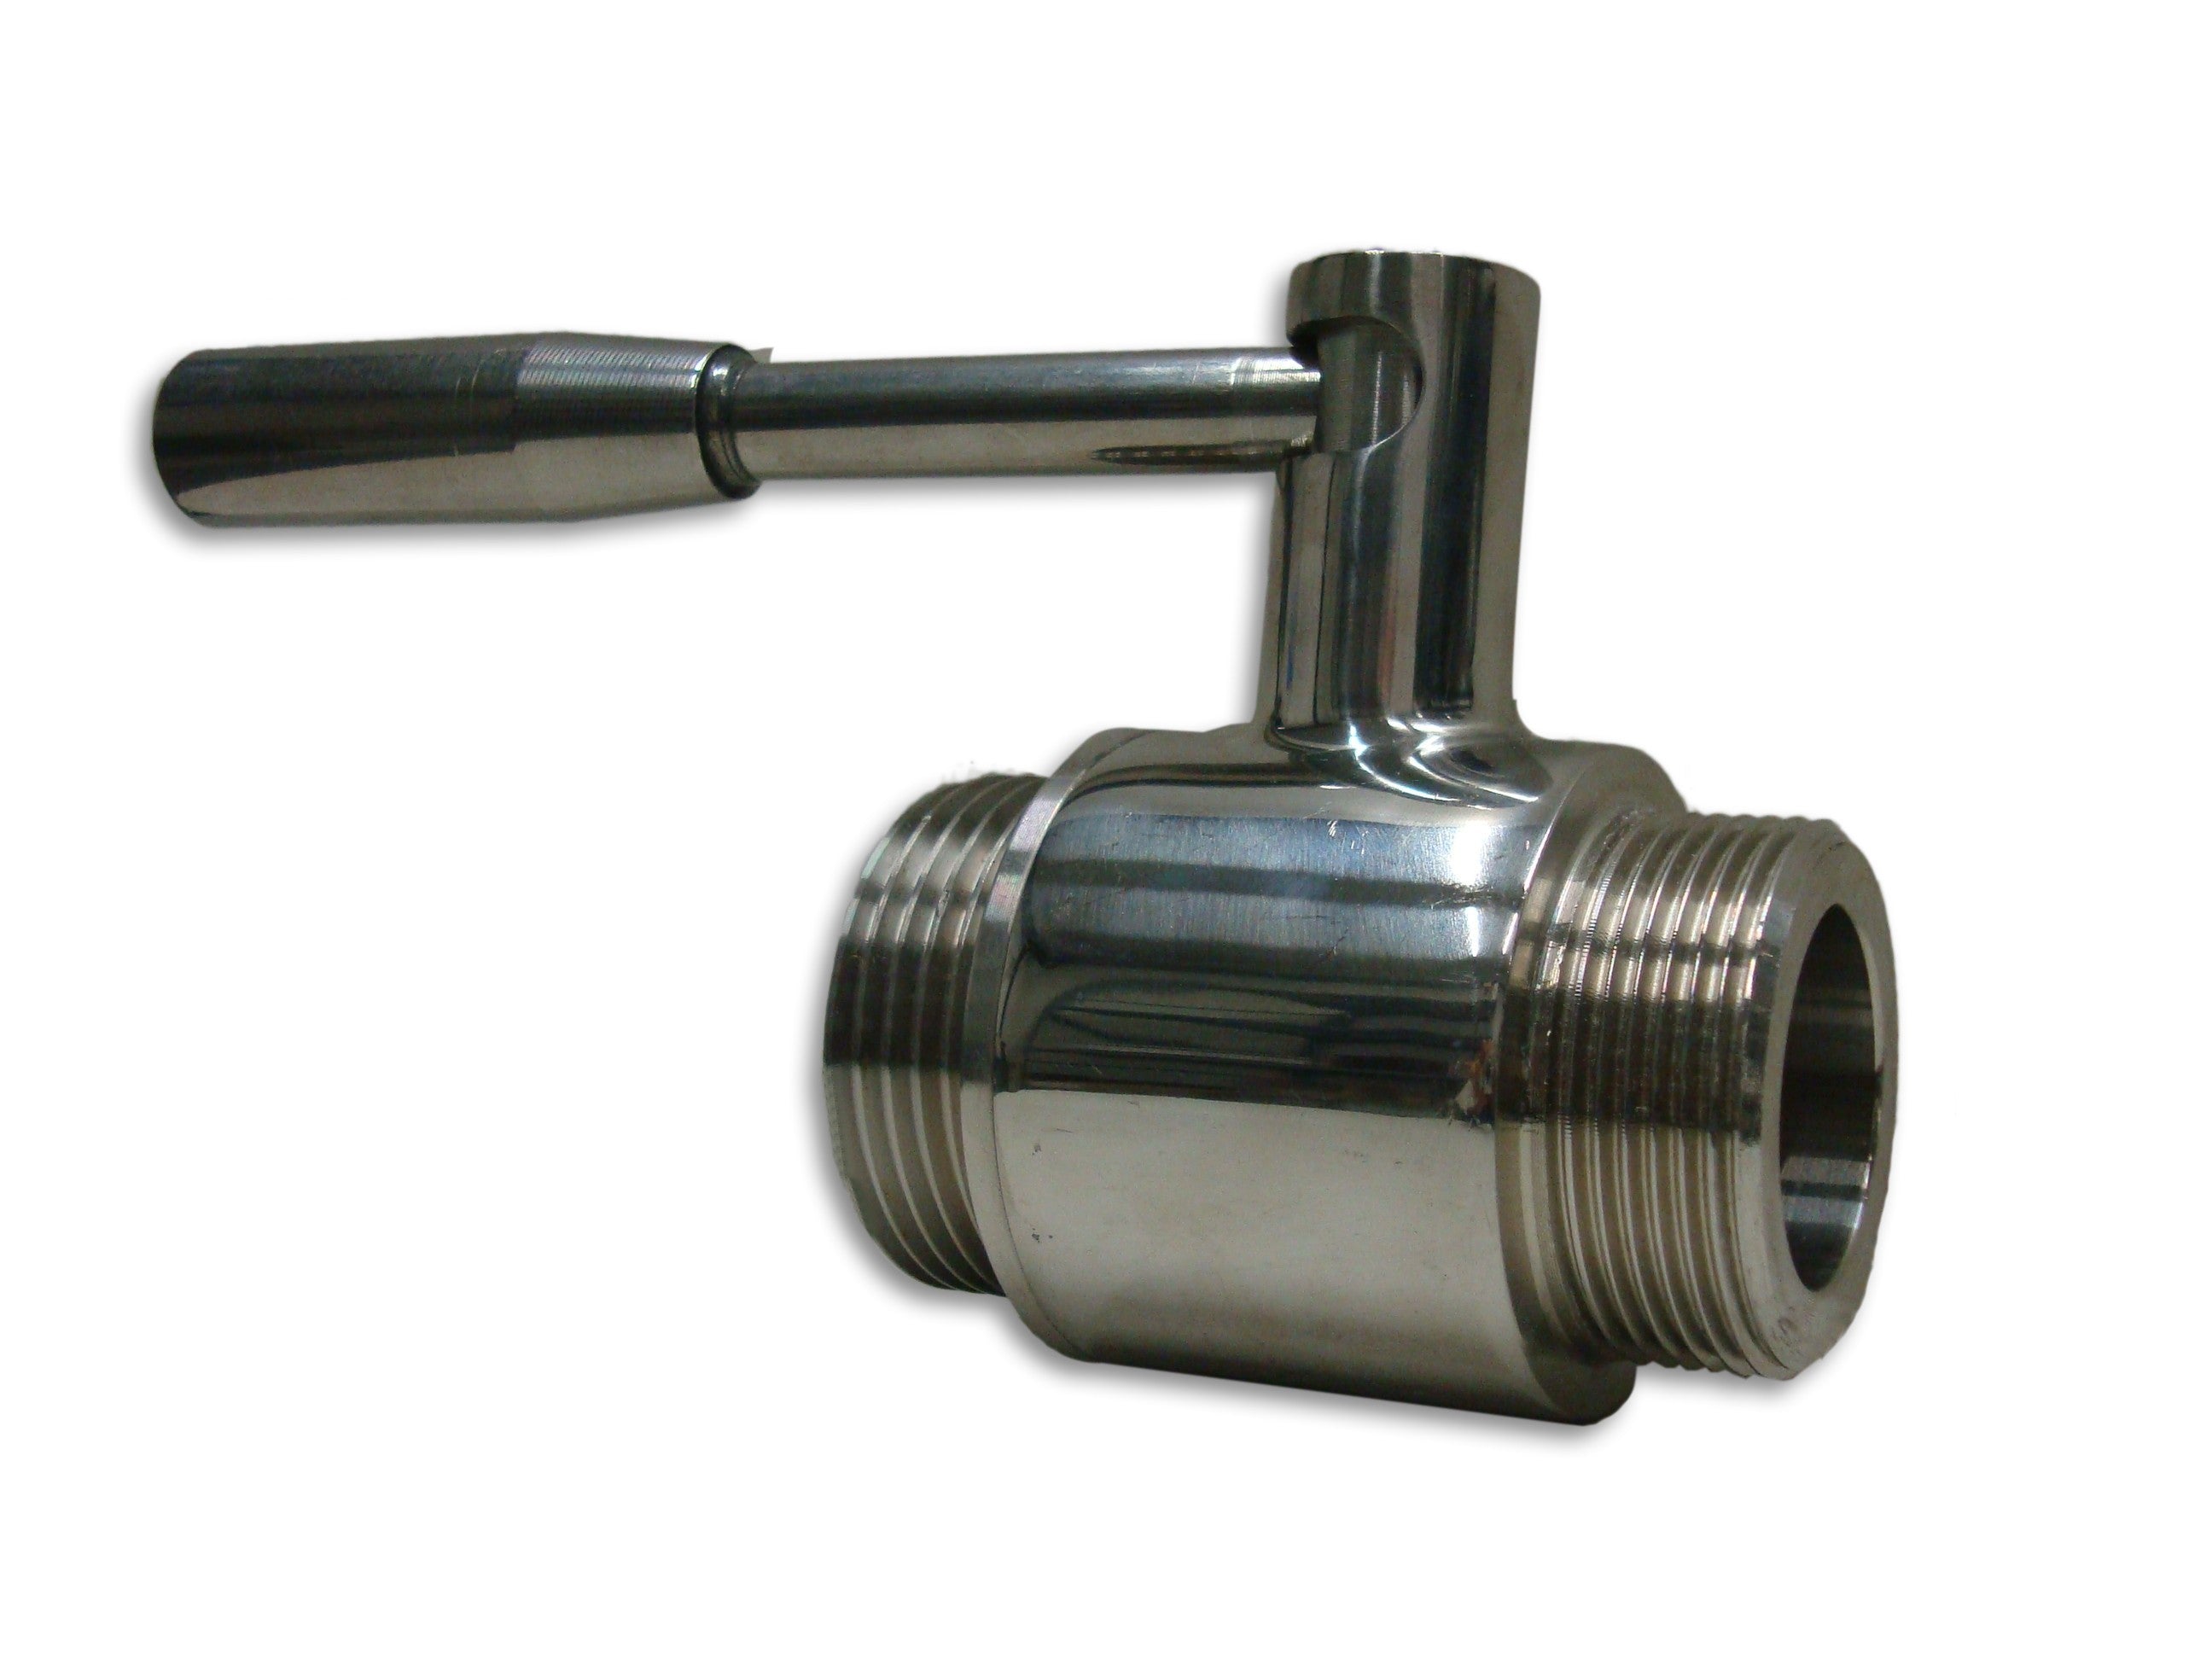 Tainless steel Ball valve 1" with enological screw